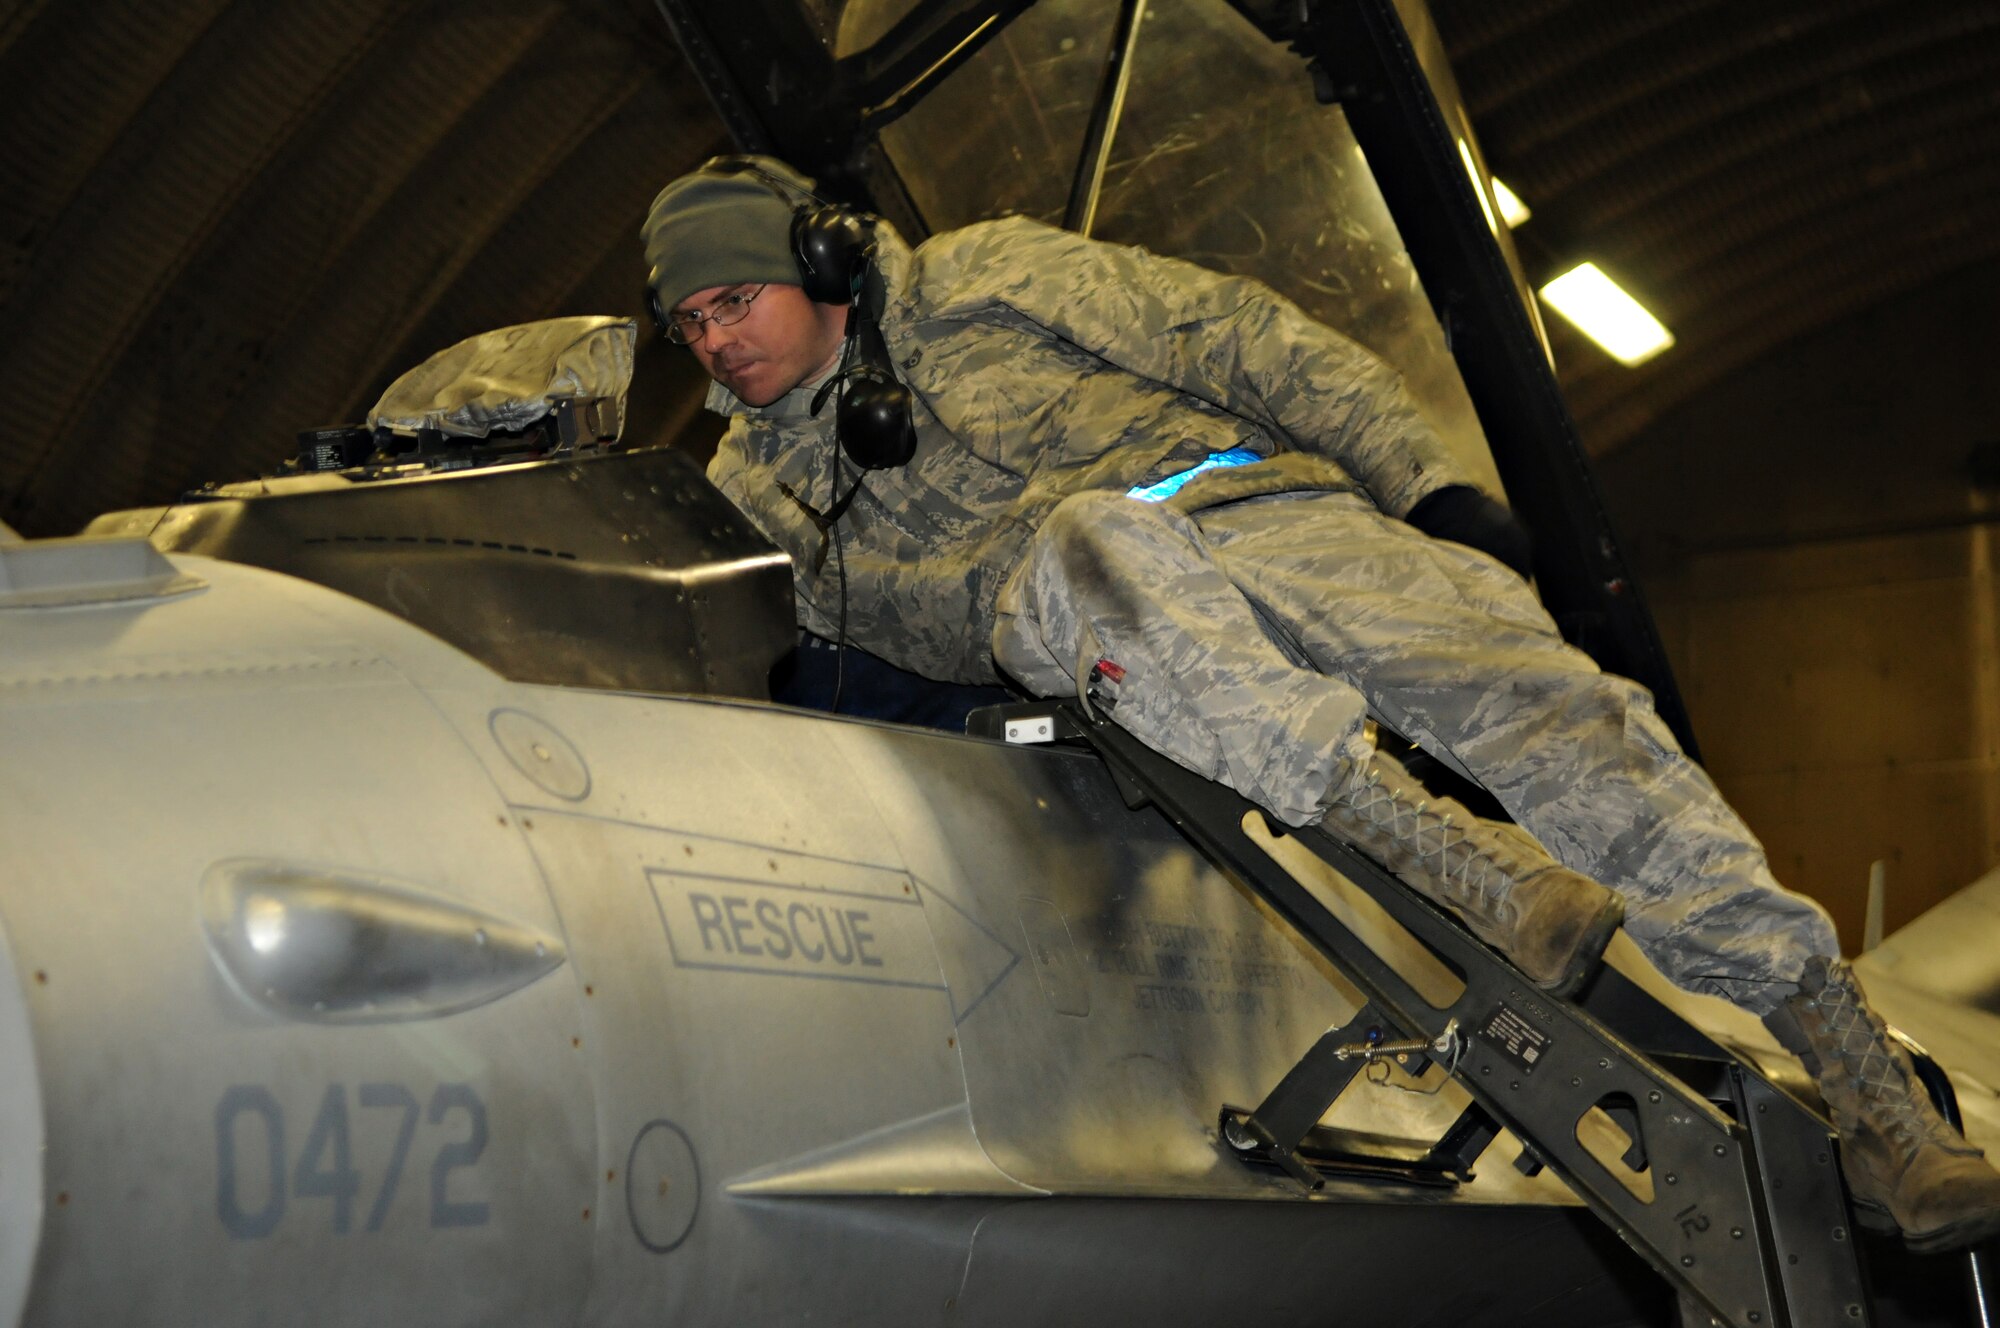 SPANGDAHLEM AIR BASE, Germany – A 52nd Aircraft Maintenance Squadron avionics craftsman rekeys the avionics systems of an F-16 Fighting Falcon here March 18 that will depart in support of Operation Odyssey Dawn. Joint Task Force Odyssey Dawn is the U.S. Africa Command task force established to provide operational and tactical command and control of U.S. military forces supporting the international response to the unrest in Libya and enforcement of United Nations Security Council Resolution (UNSCR) 1973. UNSCR 1973 authorizes all necessary measures to protect civilians in Libya under threat of attack by Qadhafi regime forces.  JTF Odyssey Dawn is commanded by U.S. Navy Admiral Samuel J. Locklear, III. (U.S. Air Force photo/Staff Sgt. Benjamin Wilson)